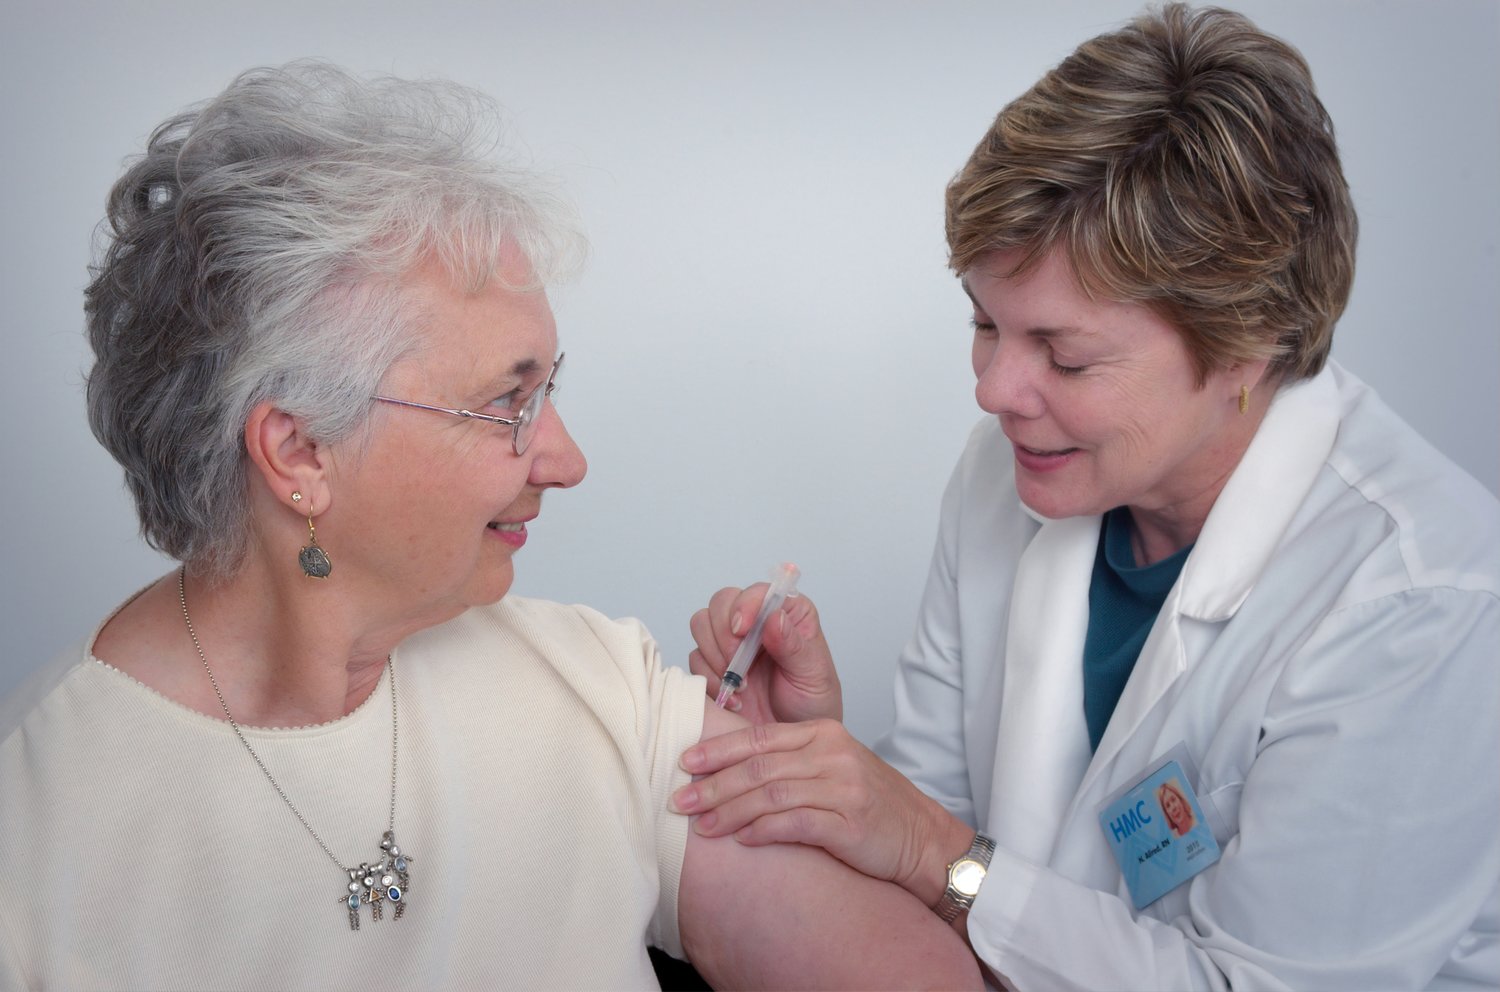 Health care worker provides a vaccination to a senior woman